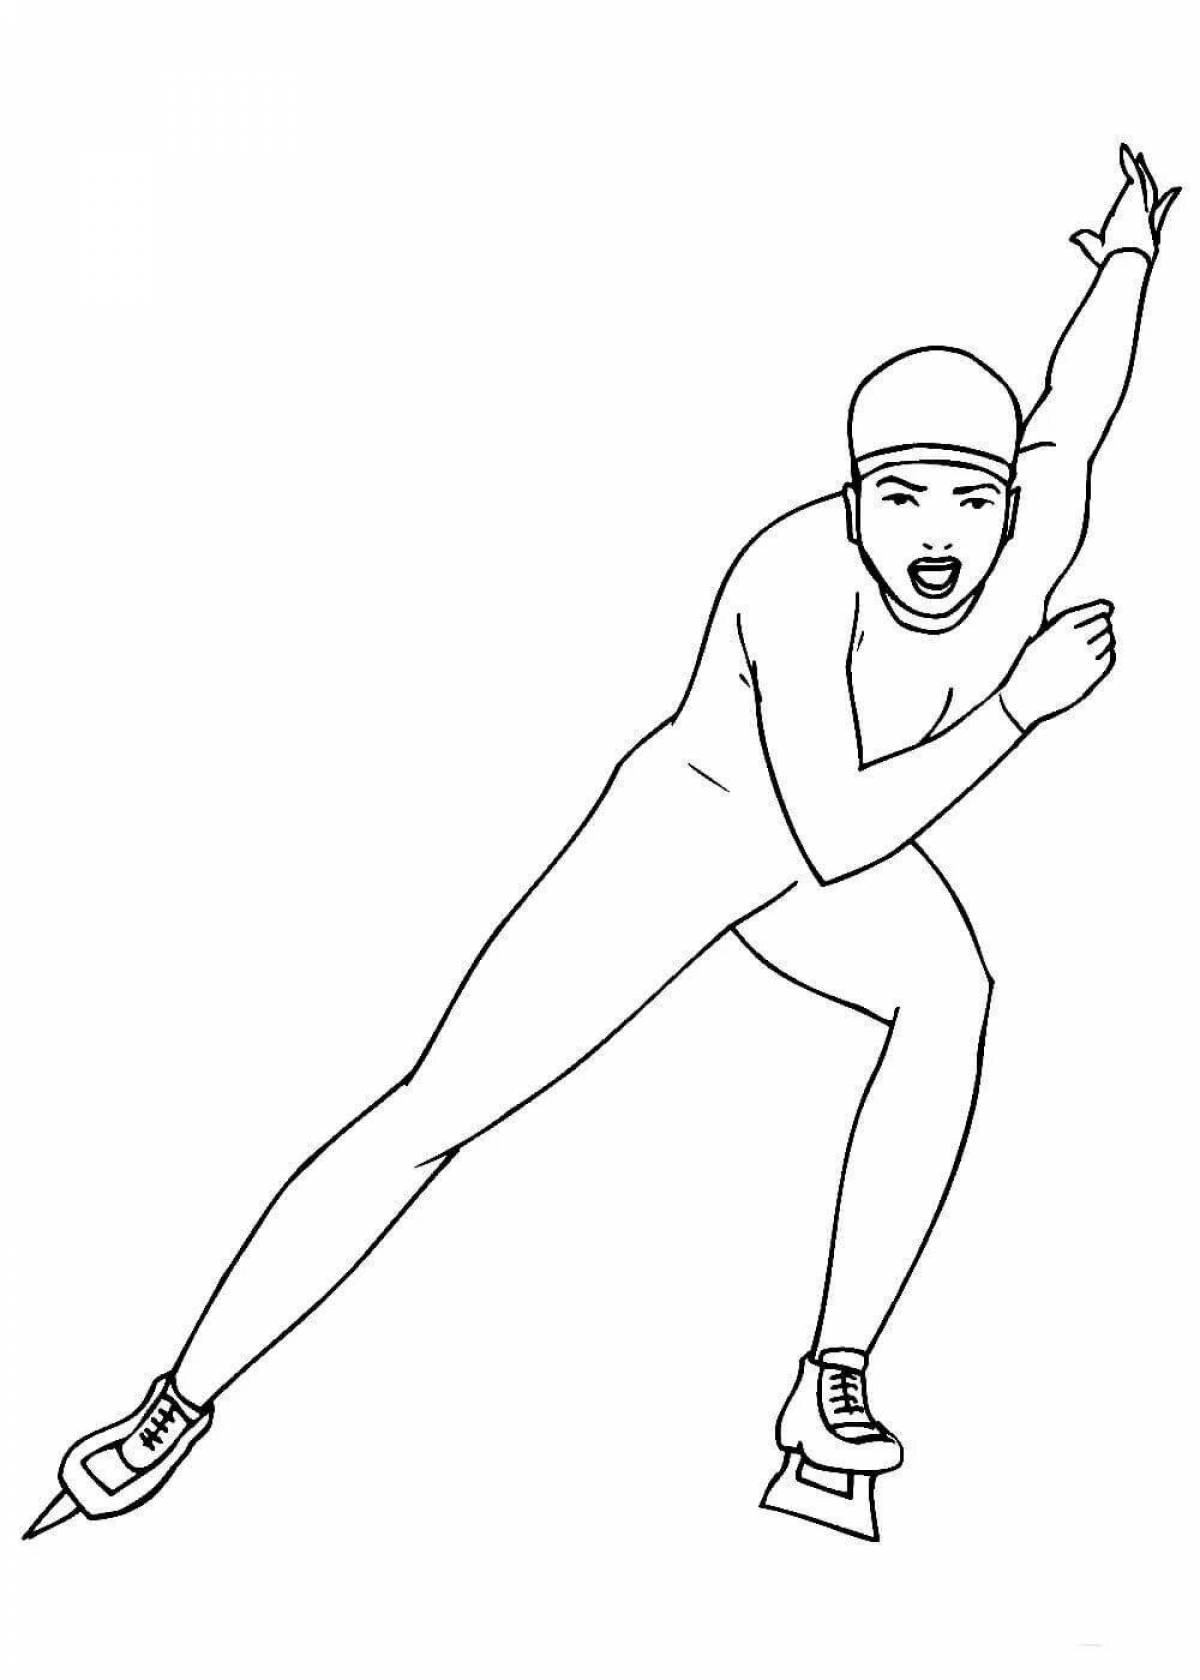 Coloring book exquisite skating